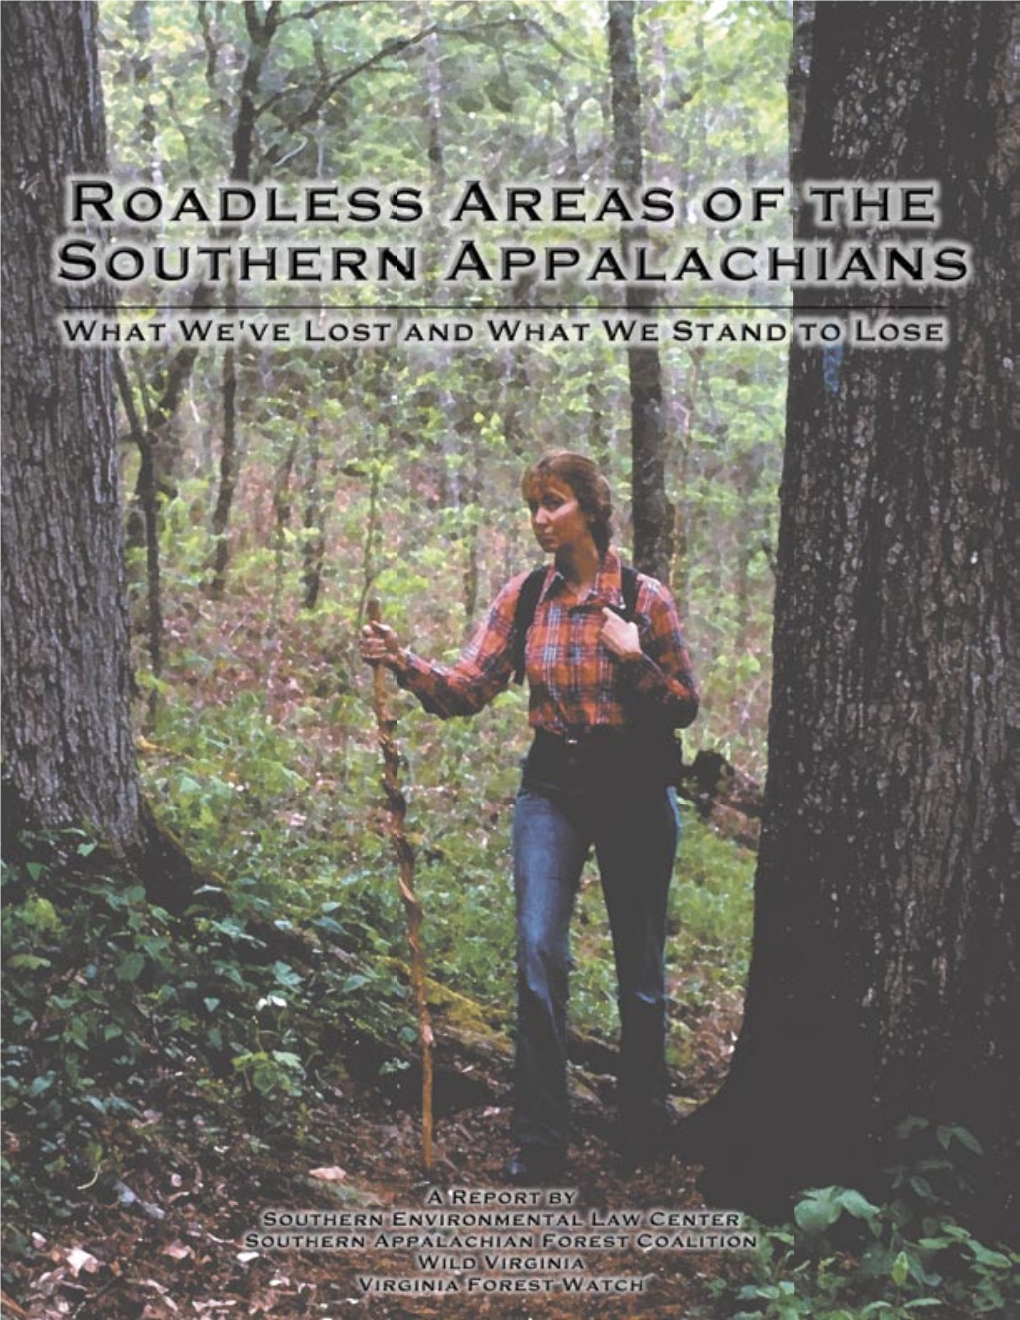 Roadless Areas of the Southern Appalachians Would Immediately Be Placed Into “Management Designations” That Permit Logging and Road-Building